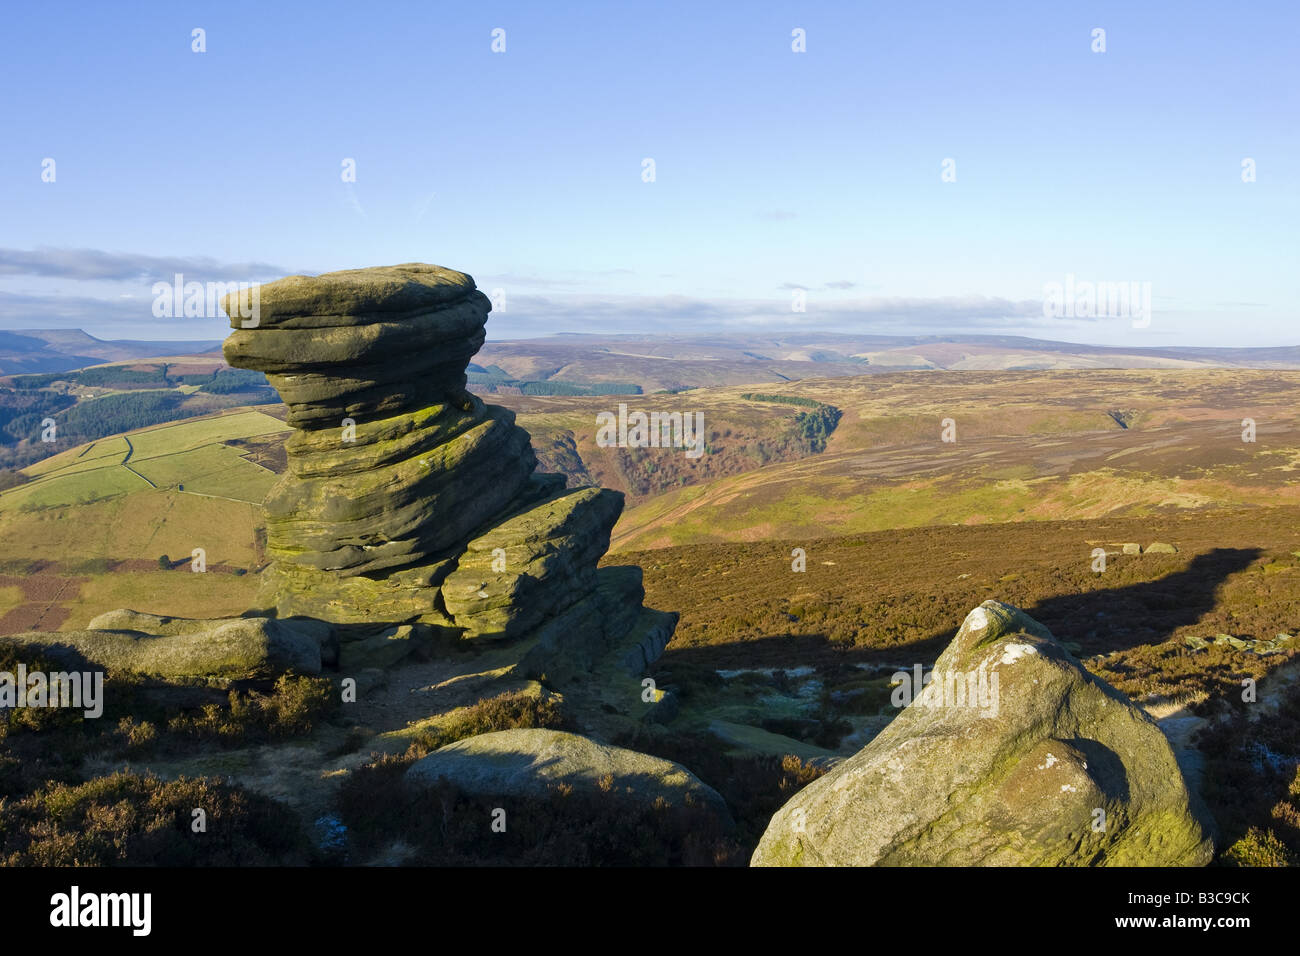 View of the Salt Cellar stone near Derwent Edge with the hills behind. Lit by the early morning light. Stock Photo